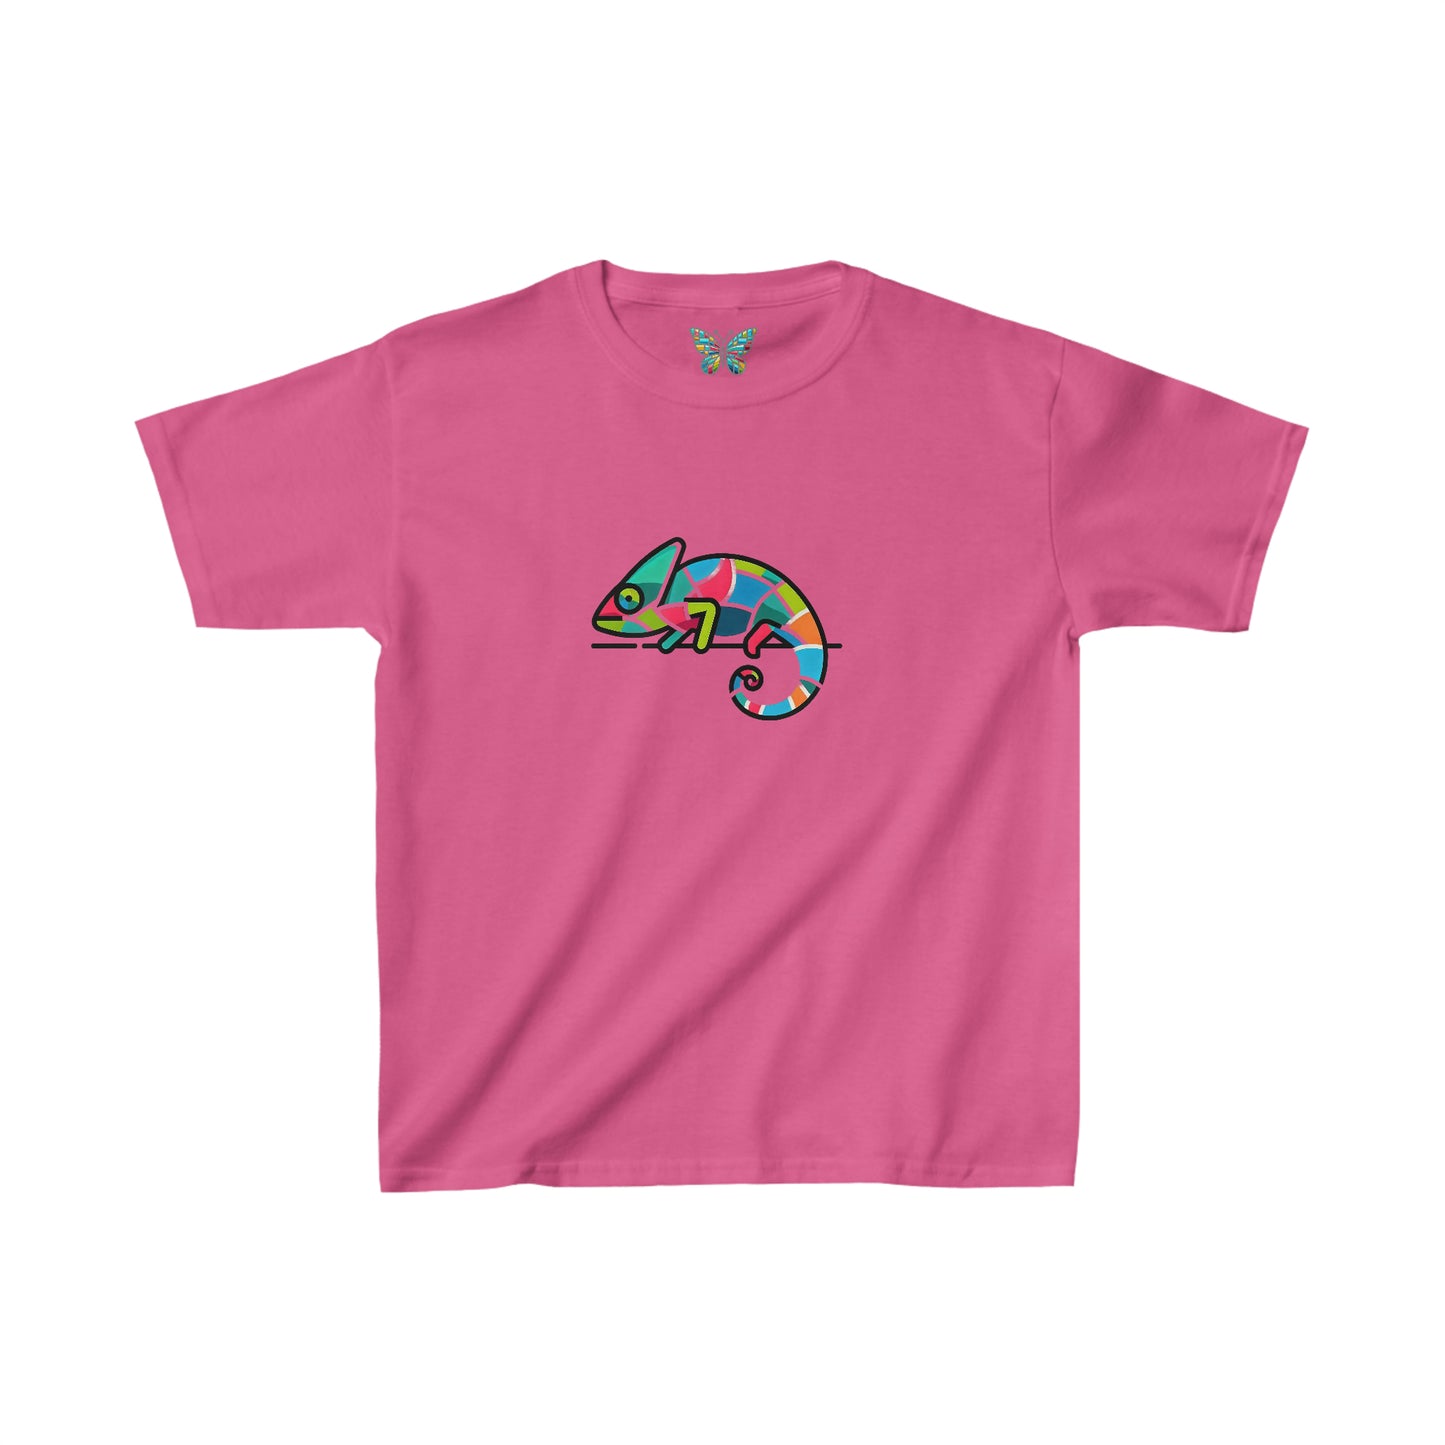 Chameleon Mosaquility - Youth - Snazzle Tee